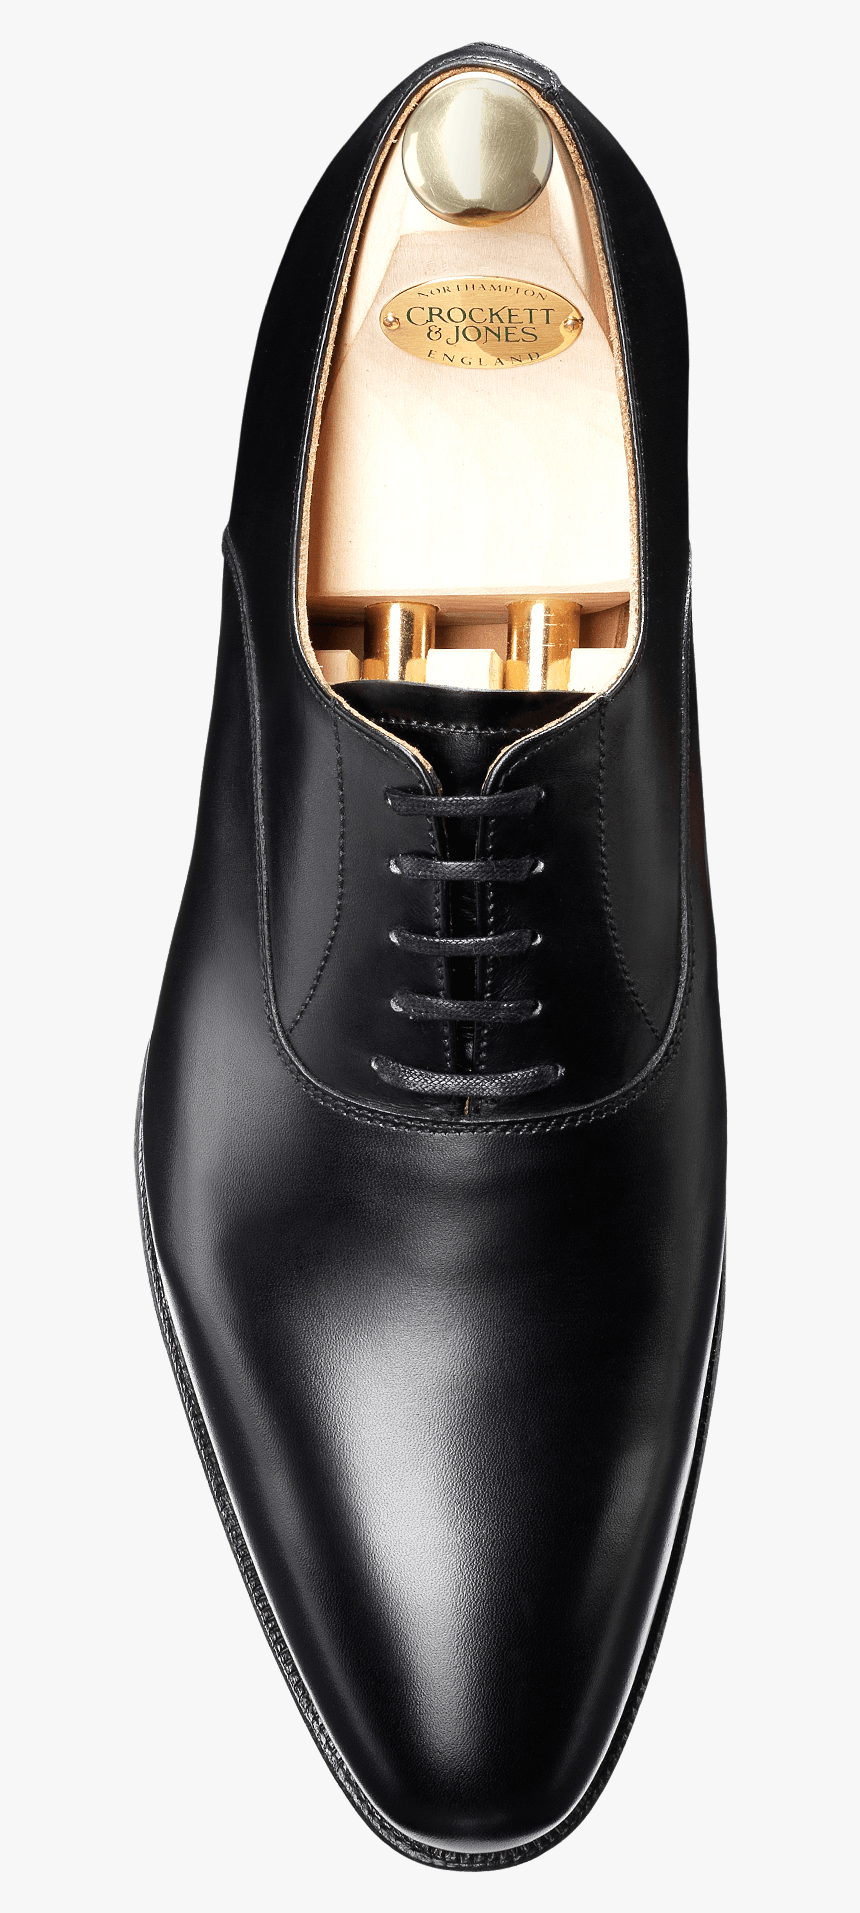 Oxford Shoe, HD Png Download, Free Download